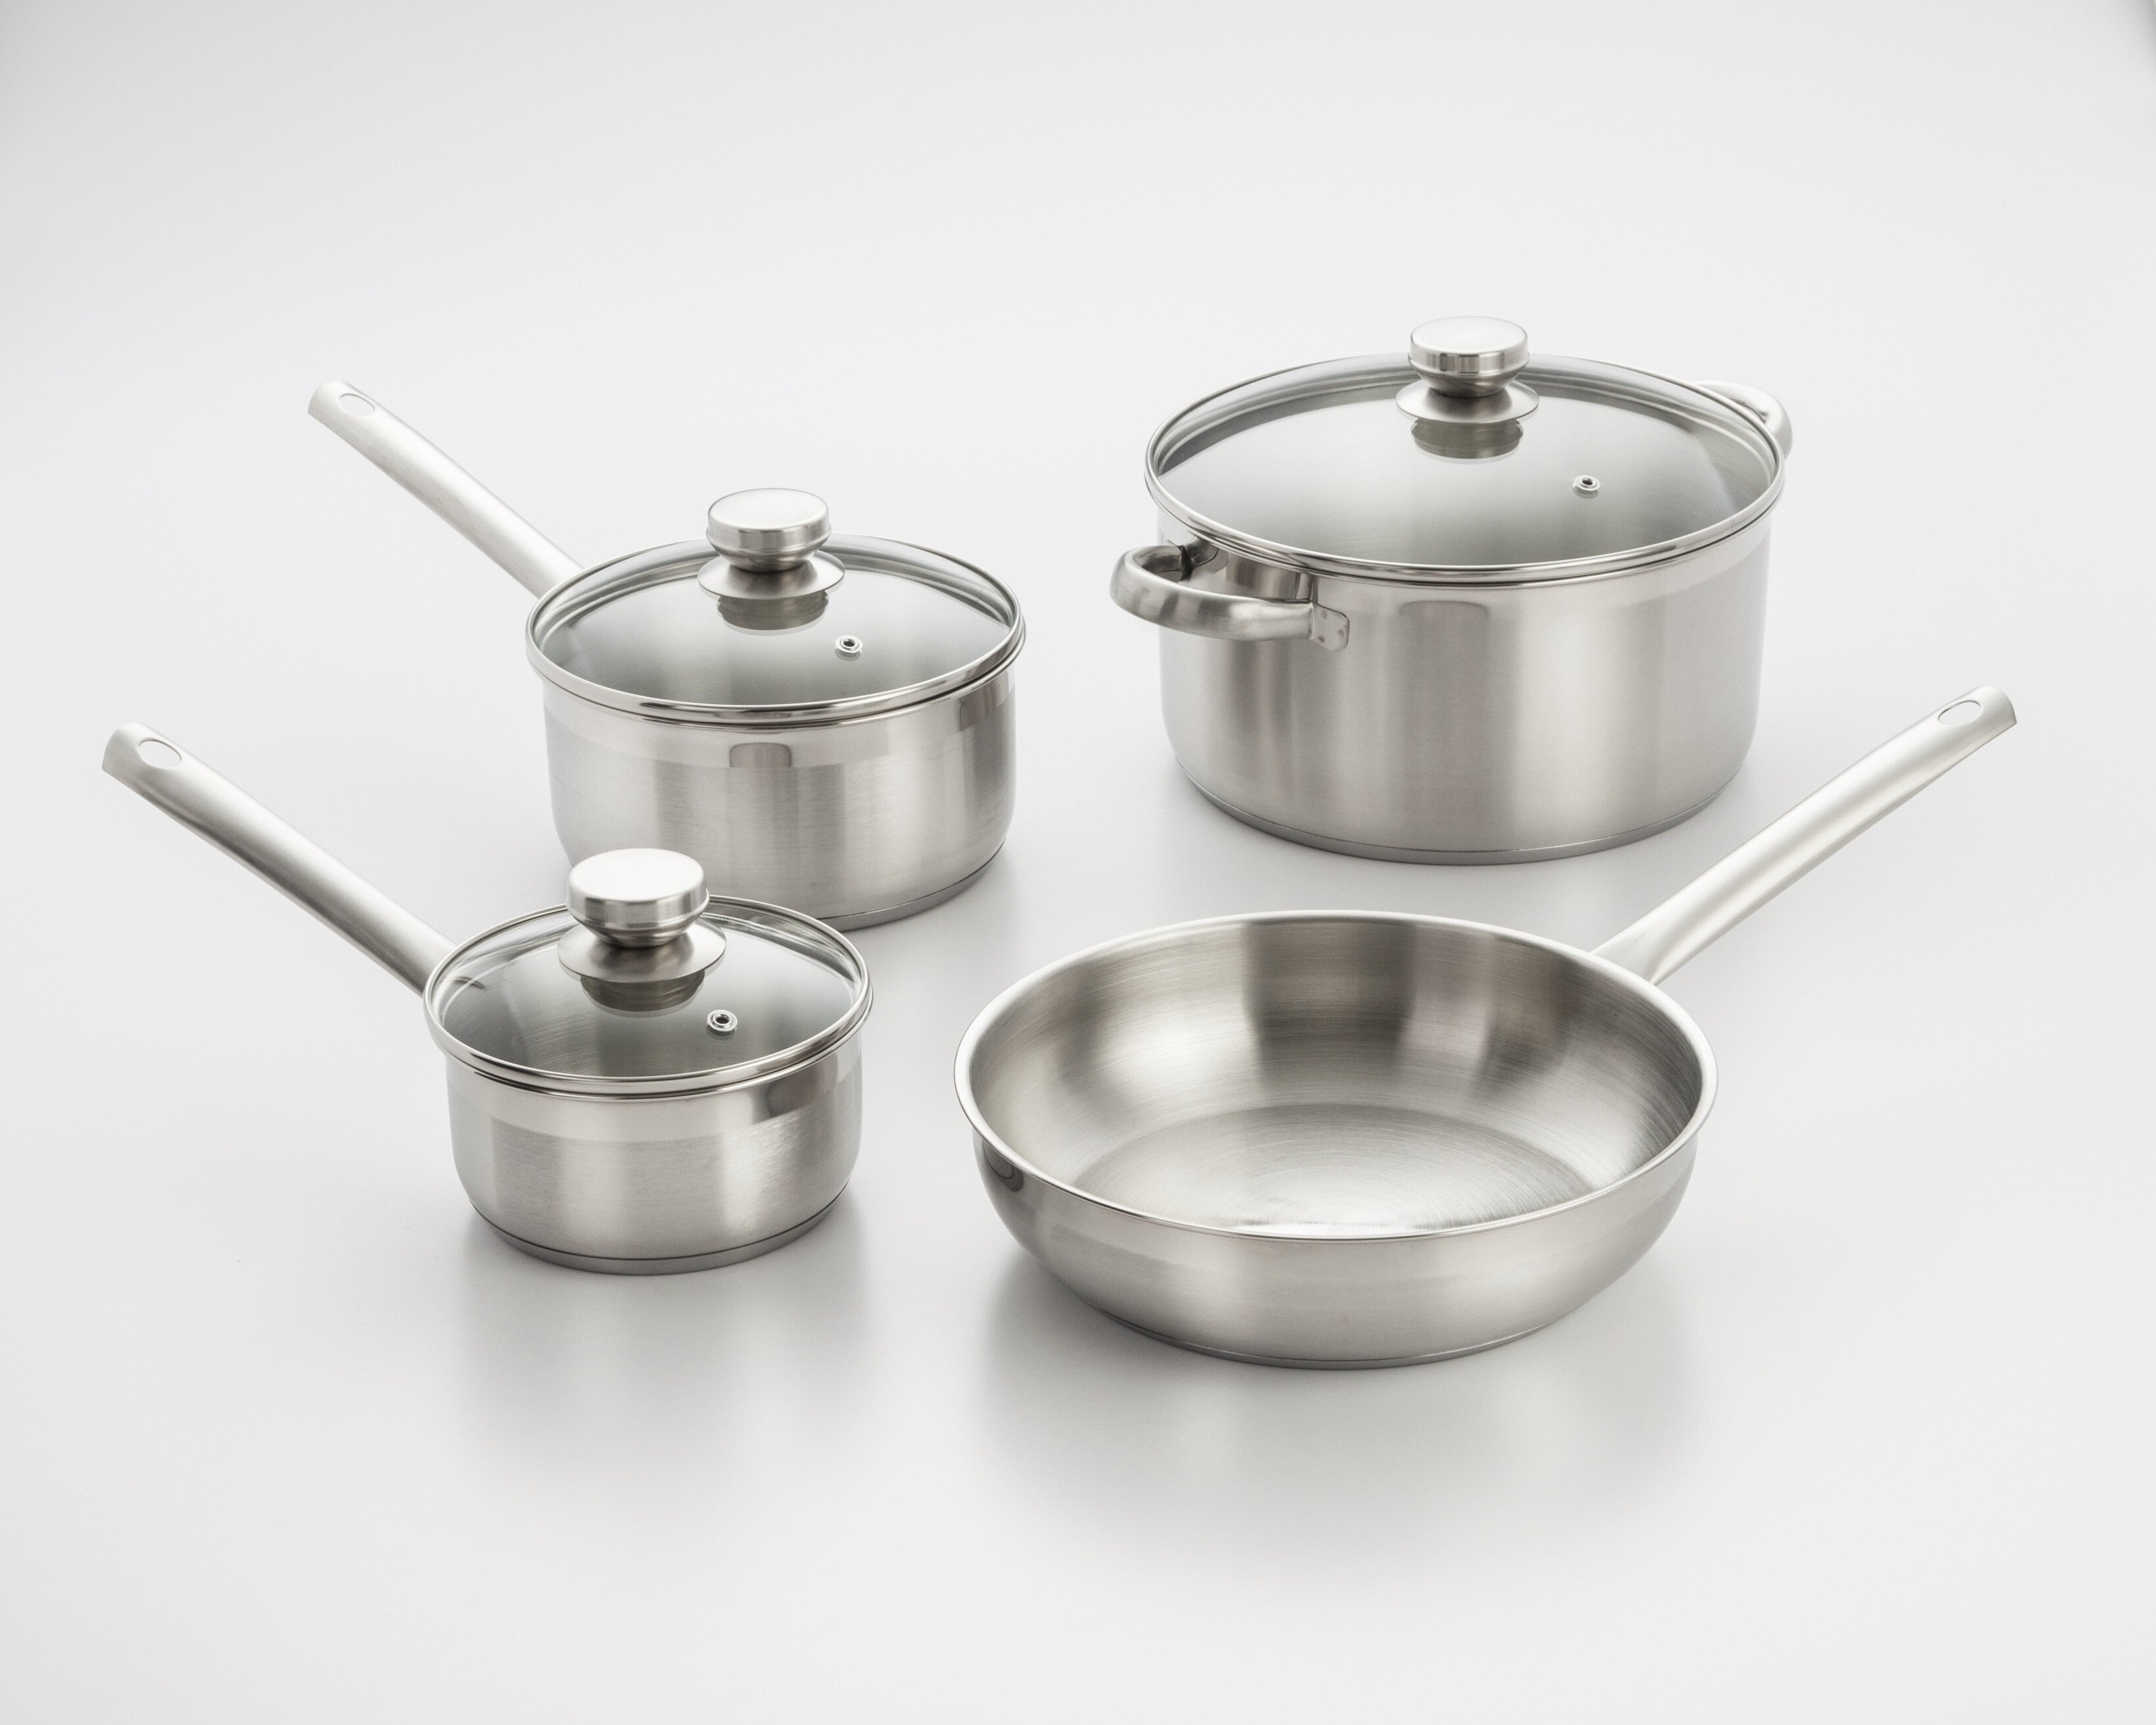 Cook Pro 18/10 Stainless Steel 7-Piece Cookware Set